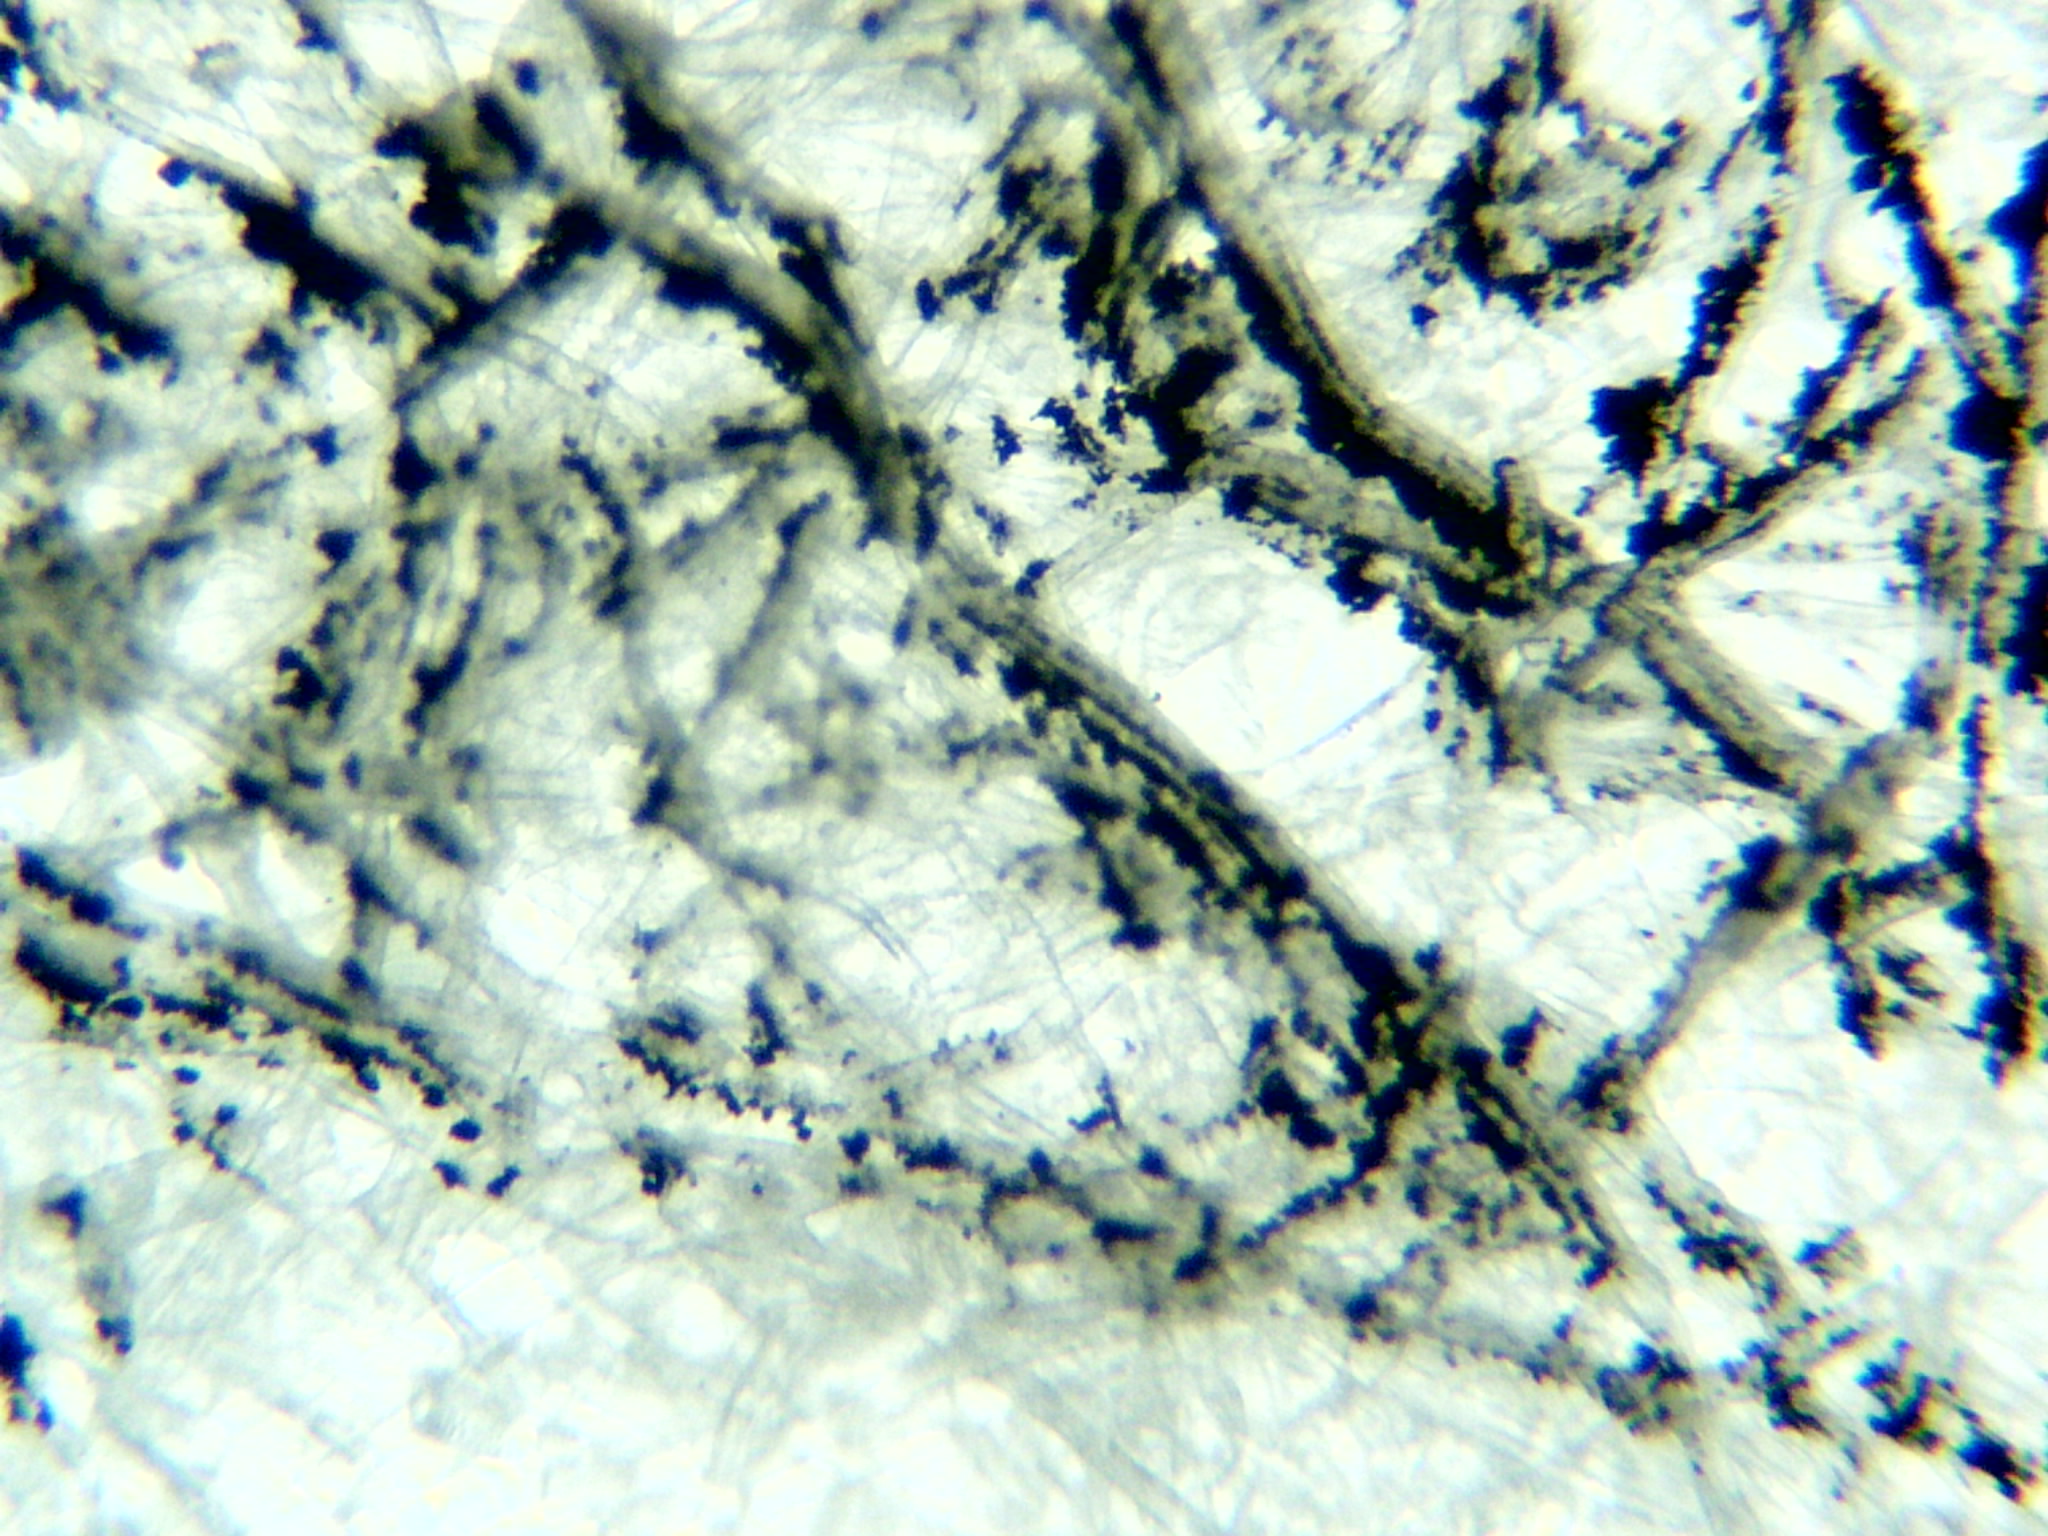 Displaying Image For Mold Under A Microscope HD Wallpaper